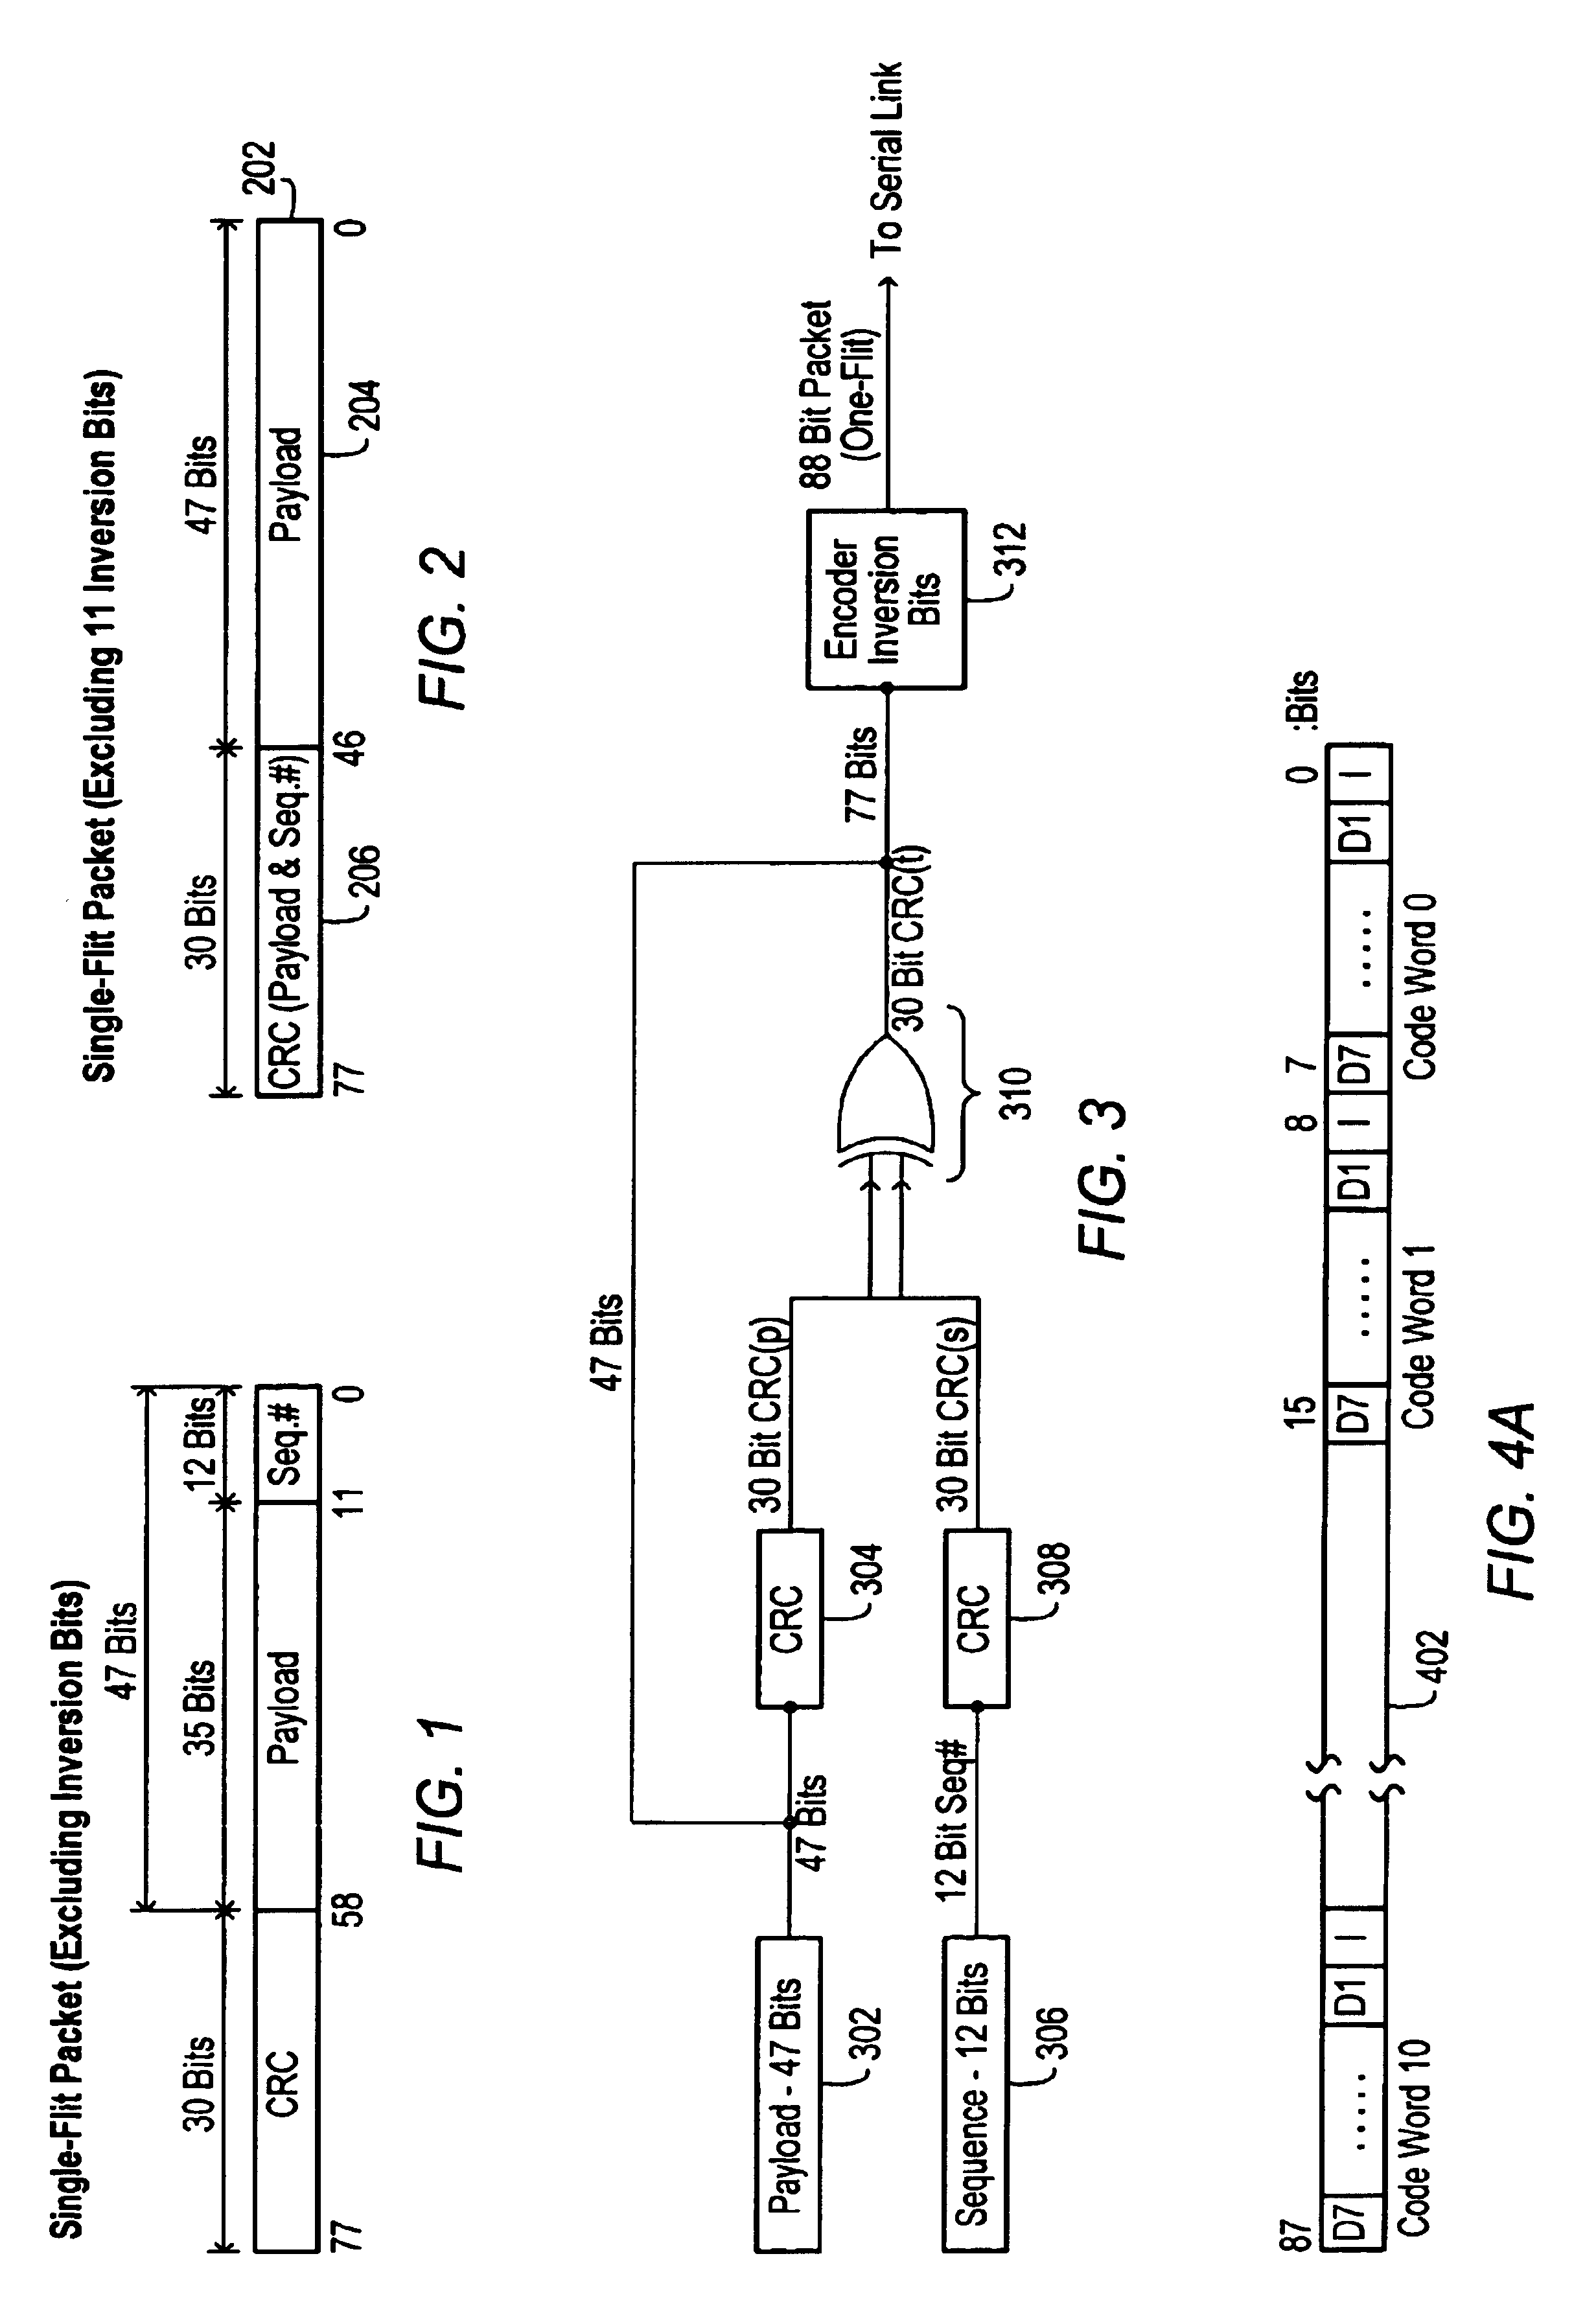 Method for superimposing a sequence number in an error detection code in a data network